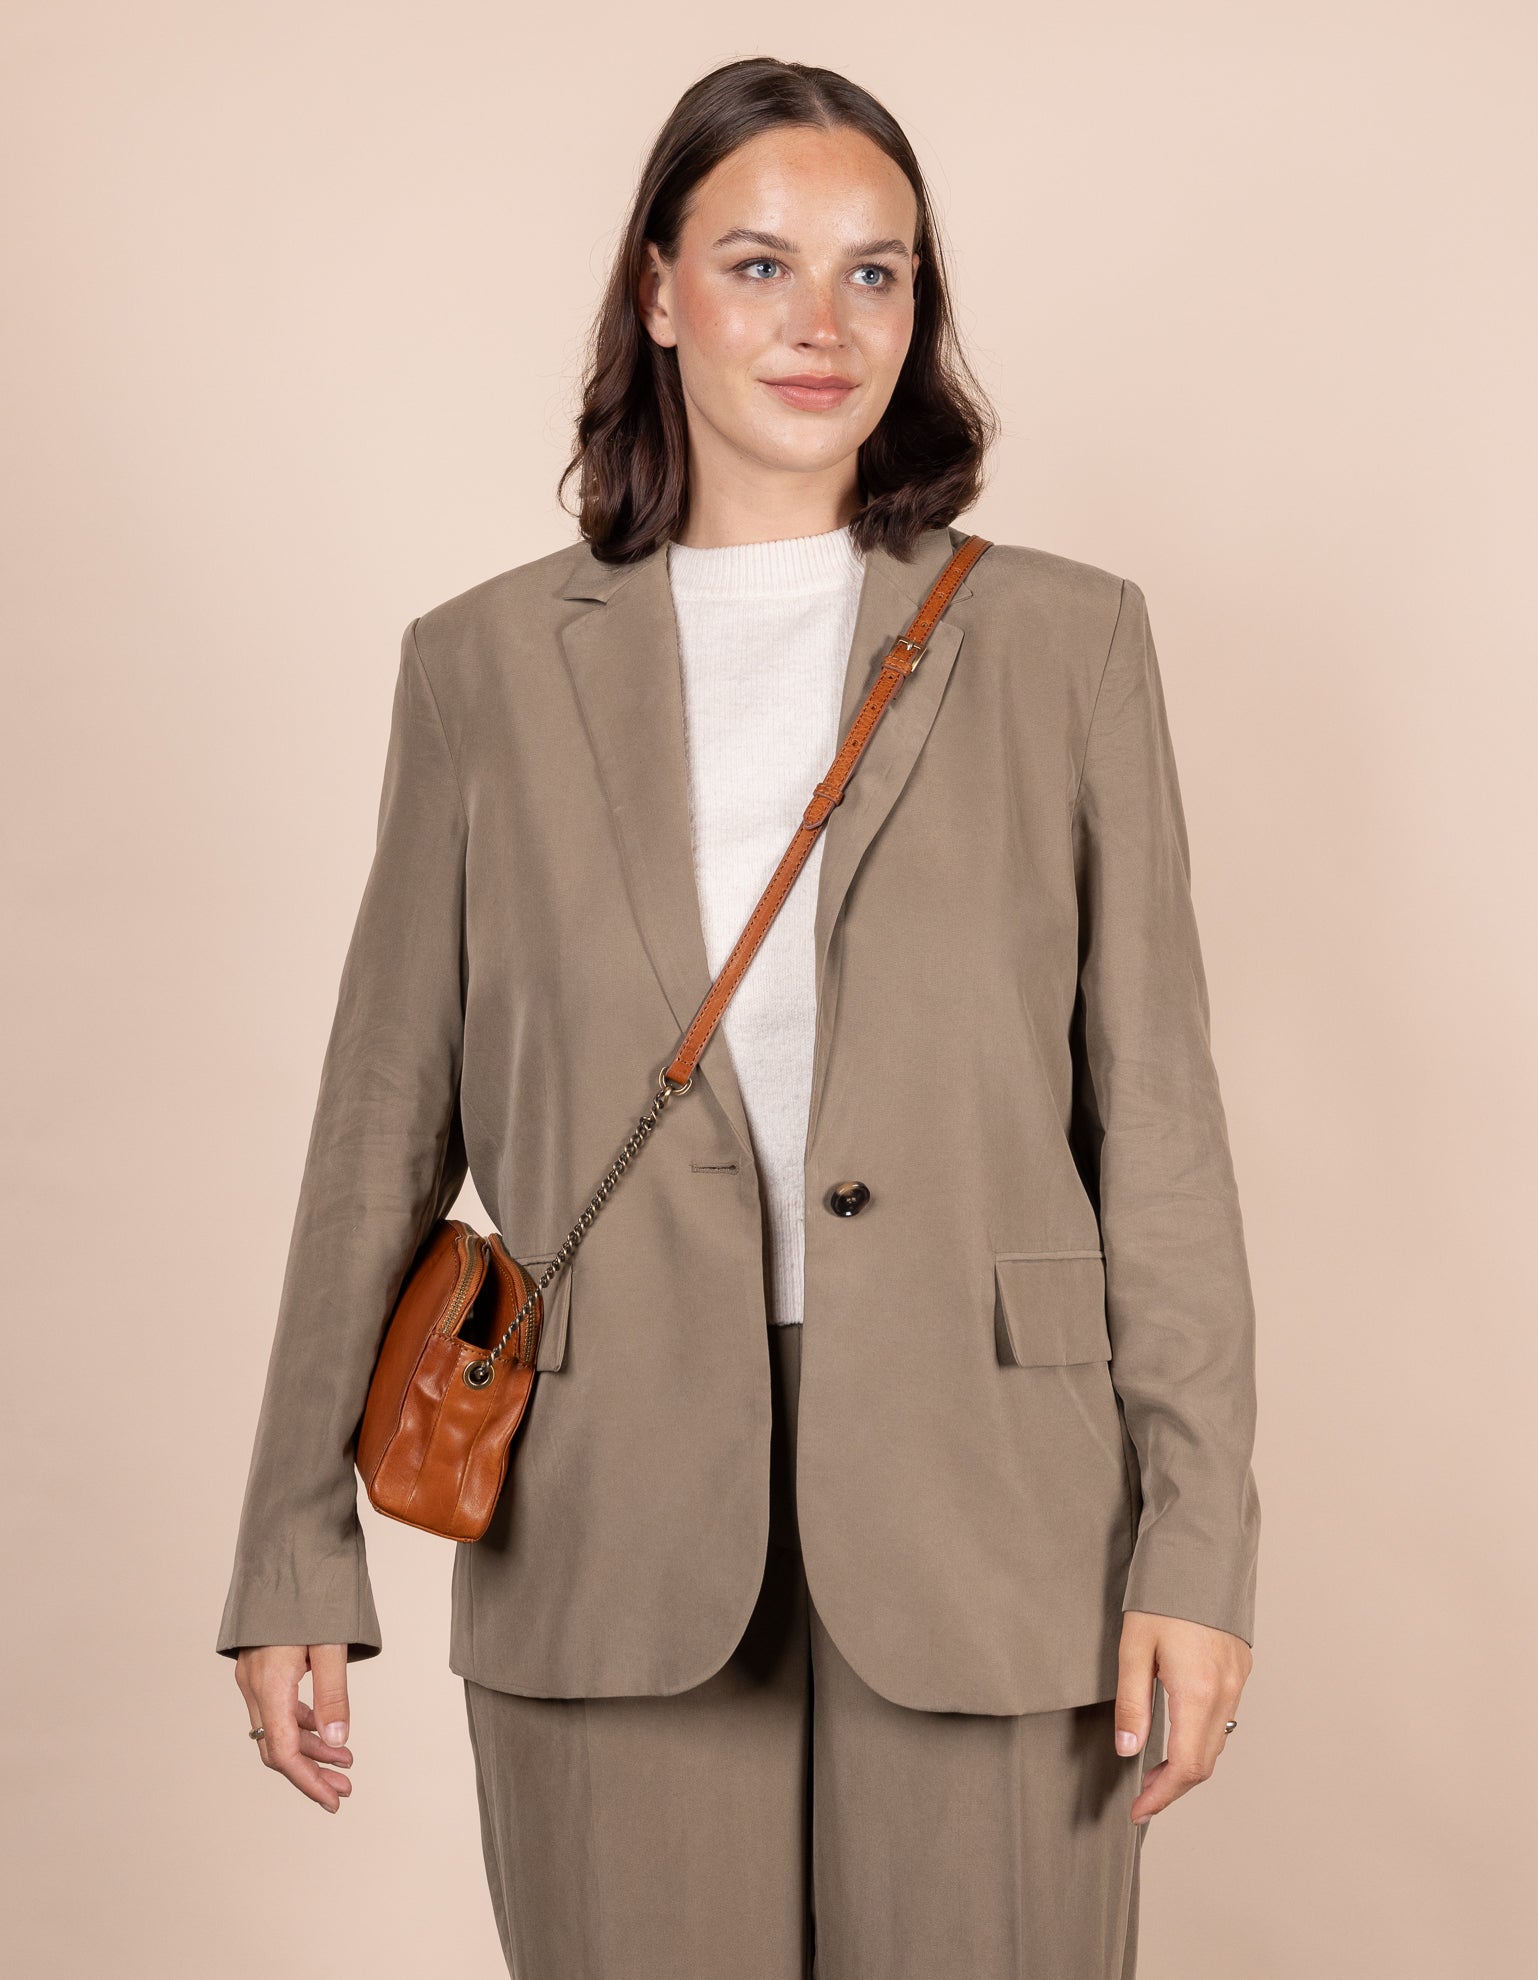 Cognac Leather womens handbag. Square shape with an adjustable leather & chain strap. Model image.